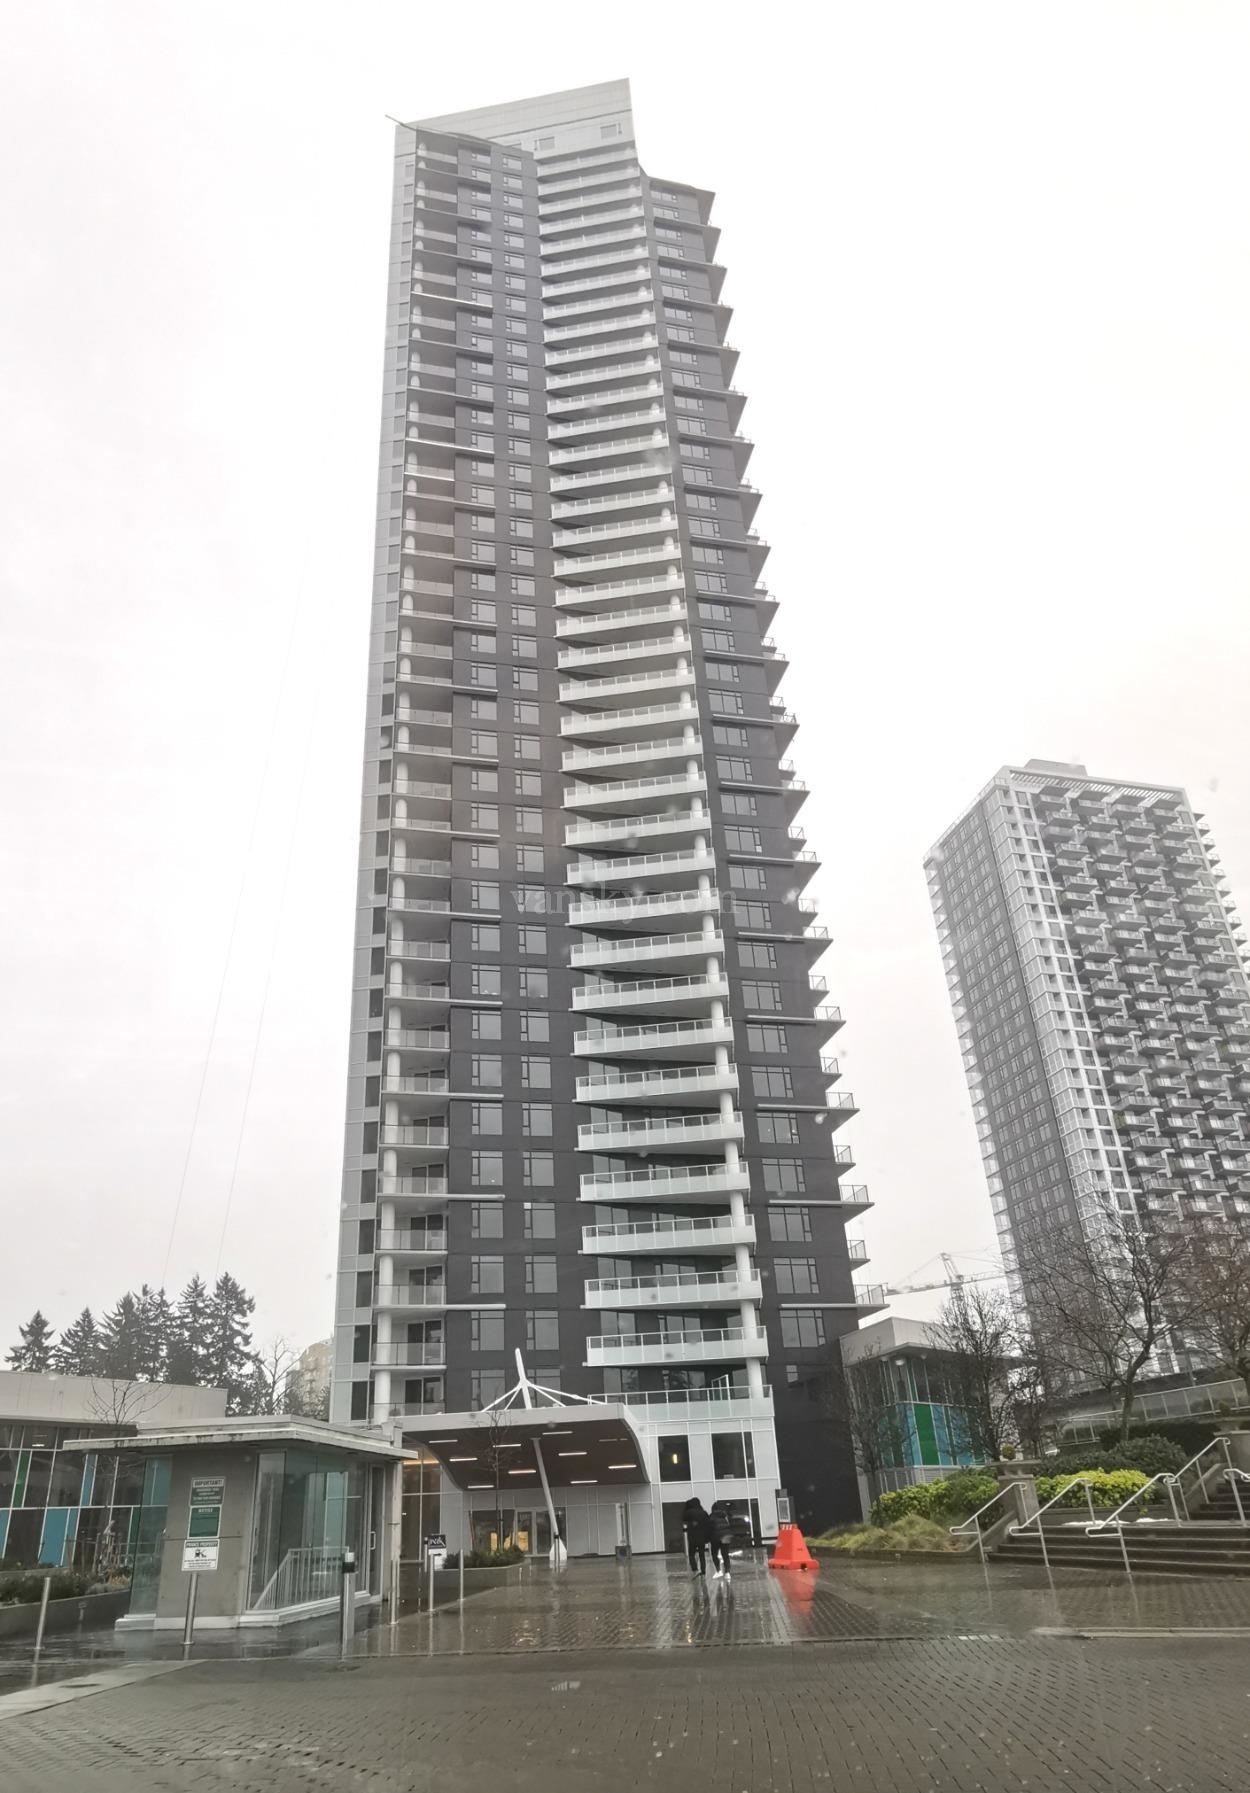 46 stories built by Concord Pacific